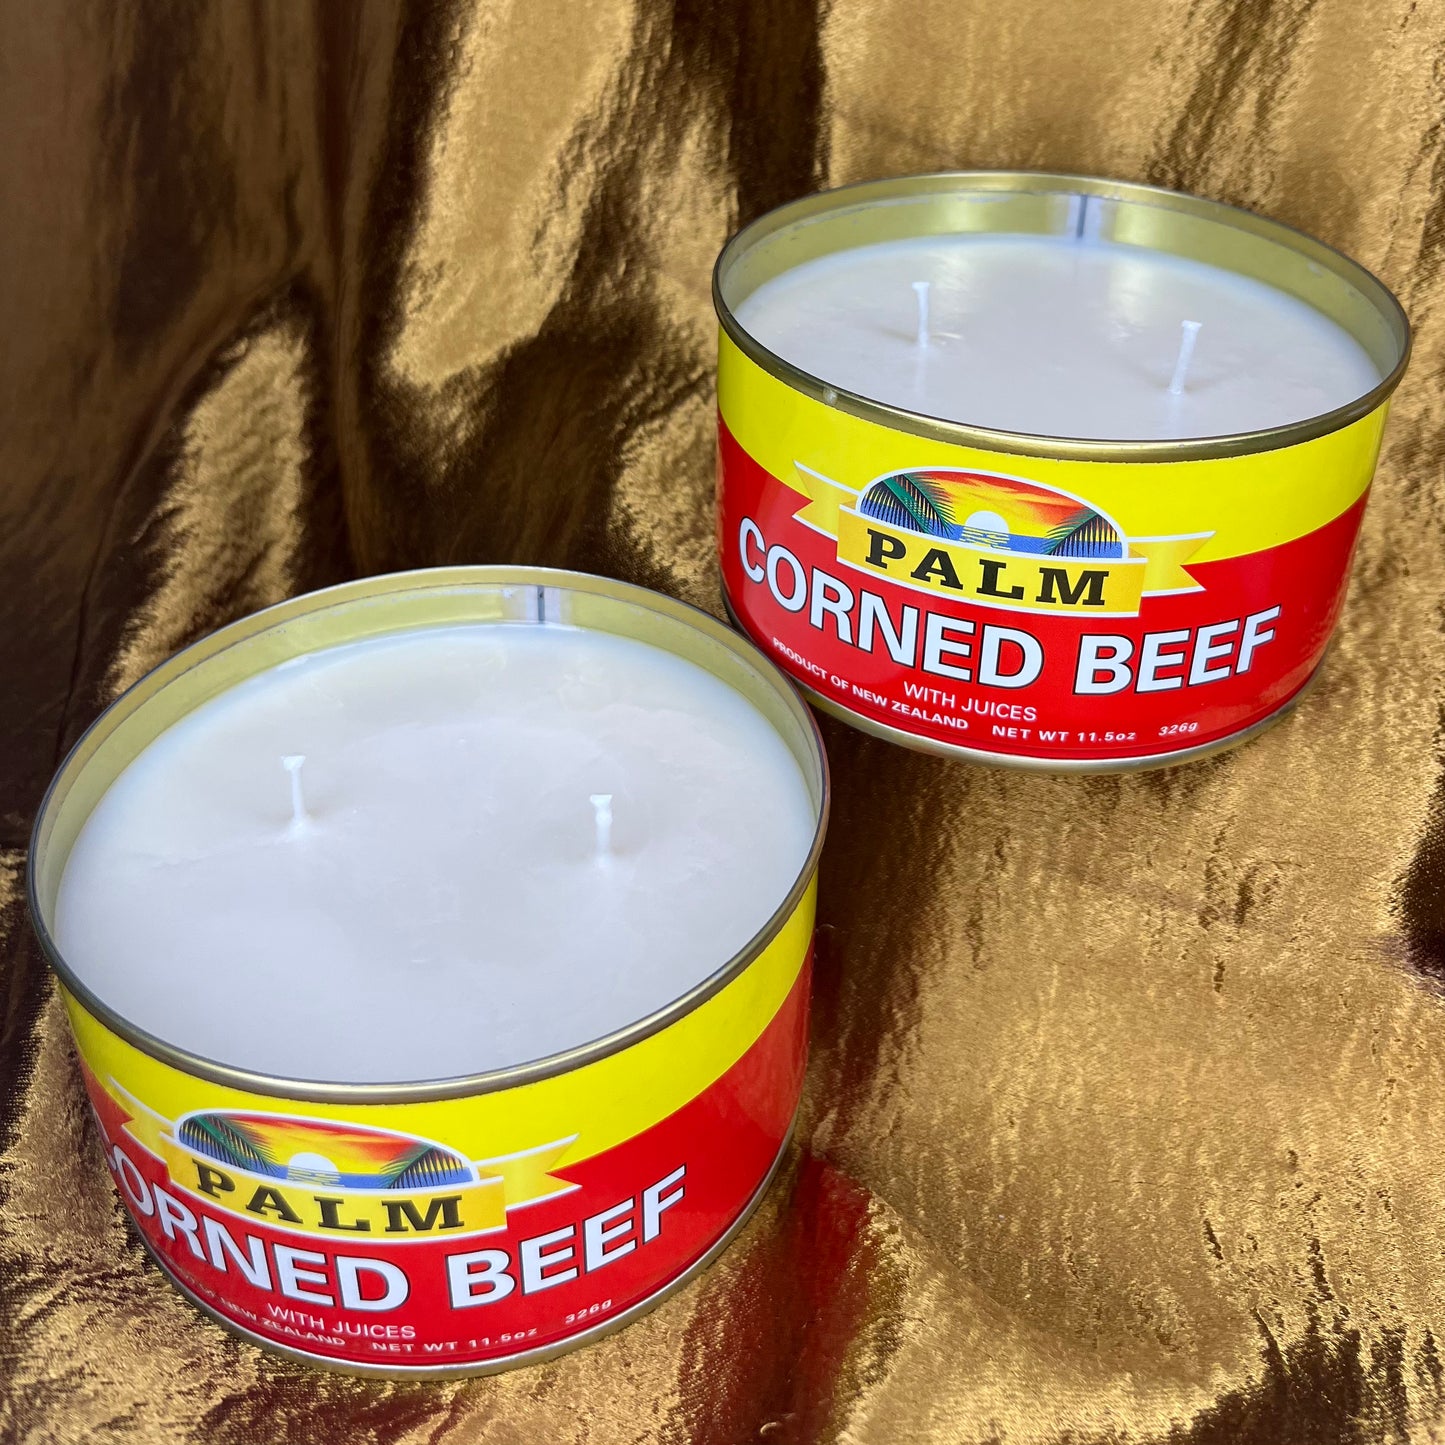 Palm Corned Beef Candle